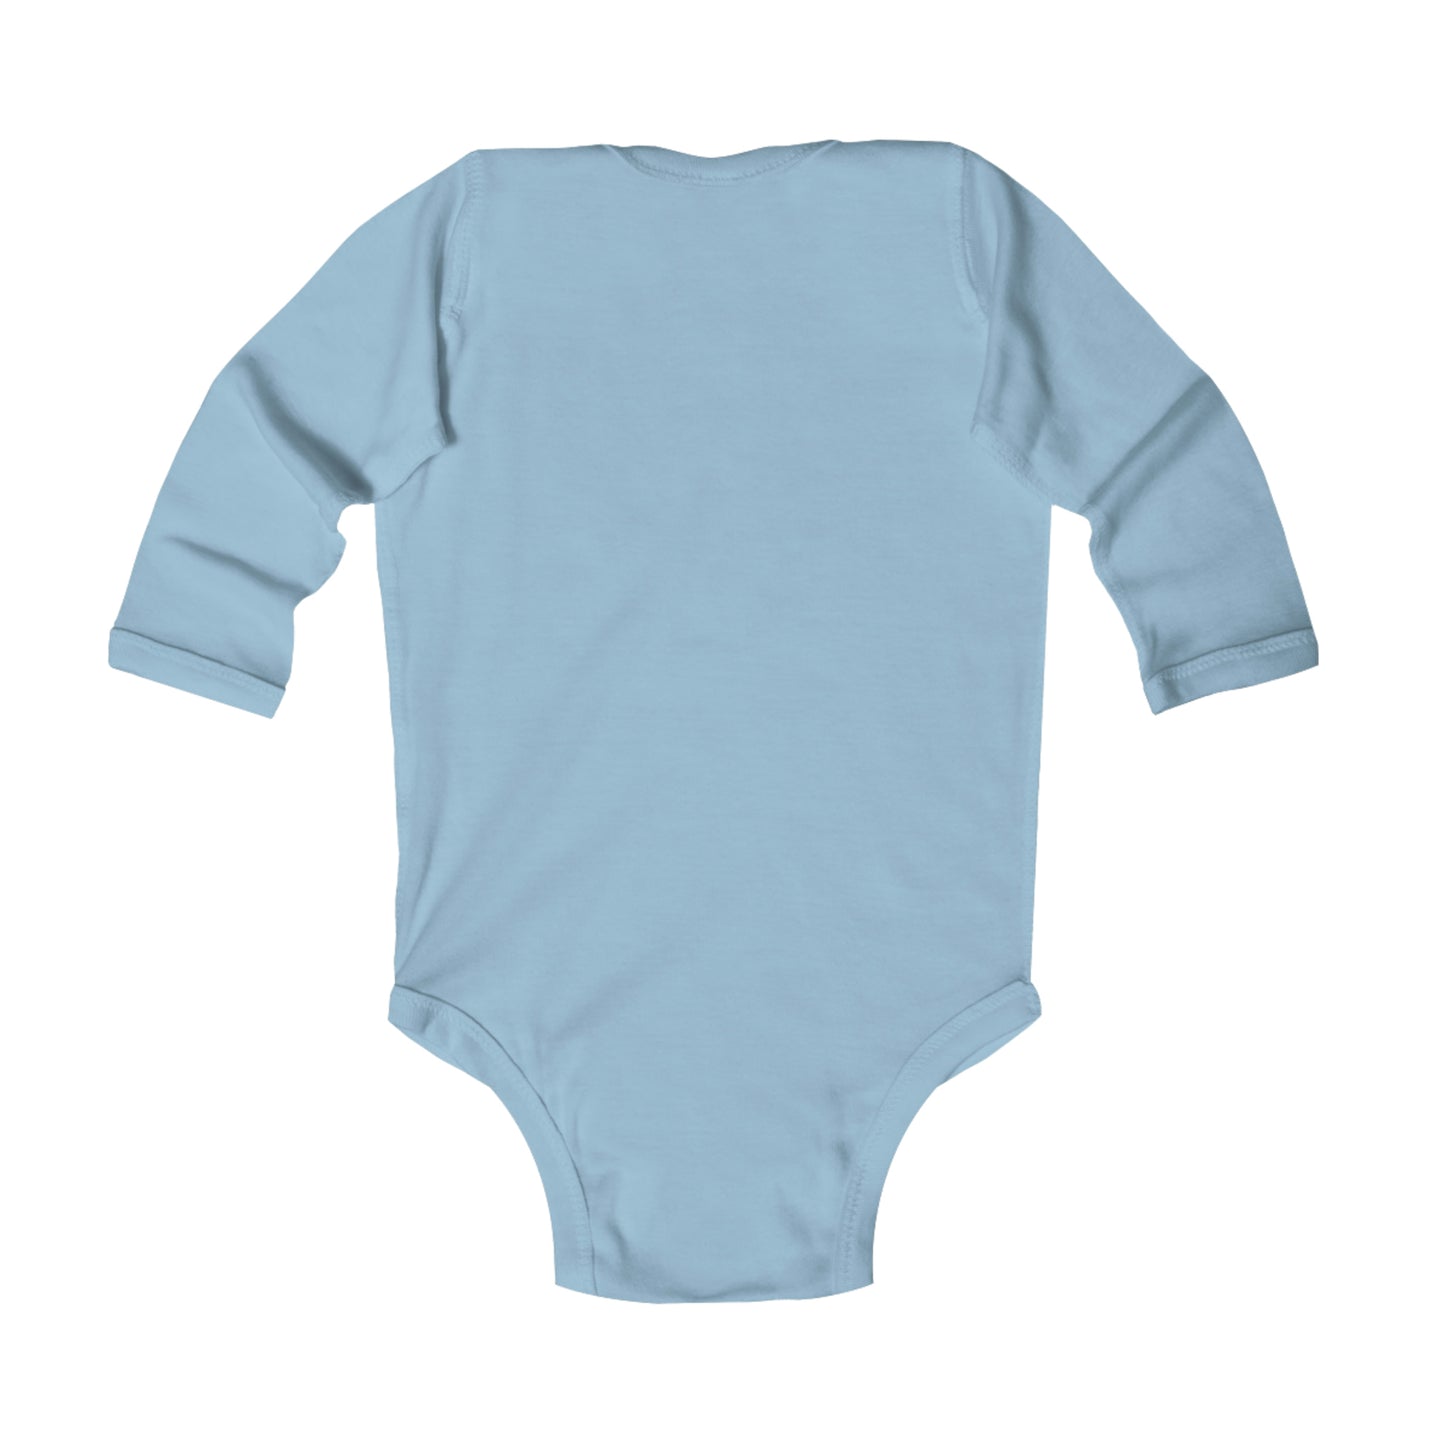 Infant Long Sleeve Onesie | CRFC Wolfhounds Blue Crest